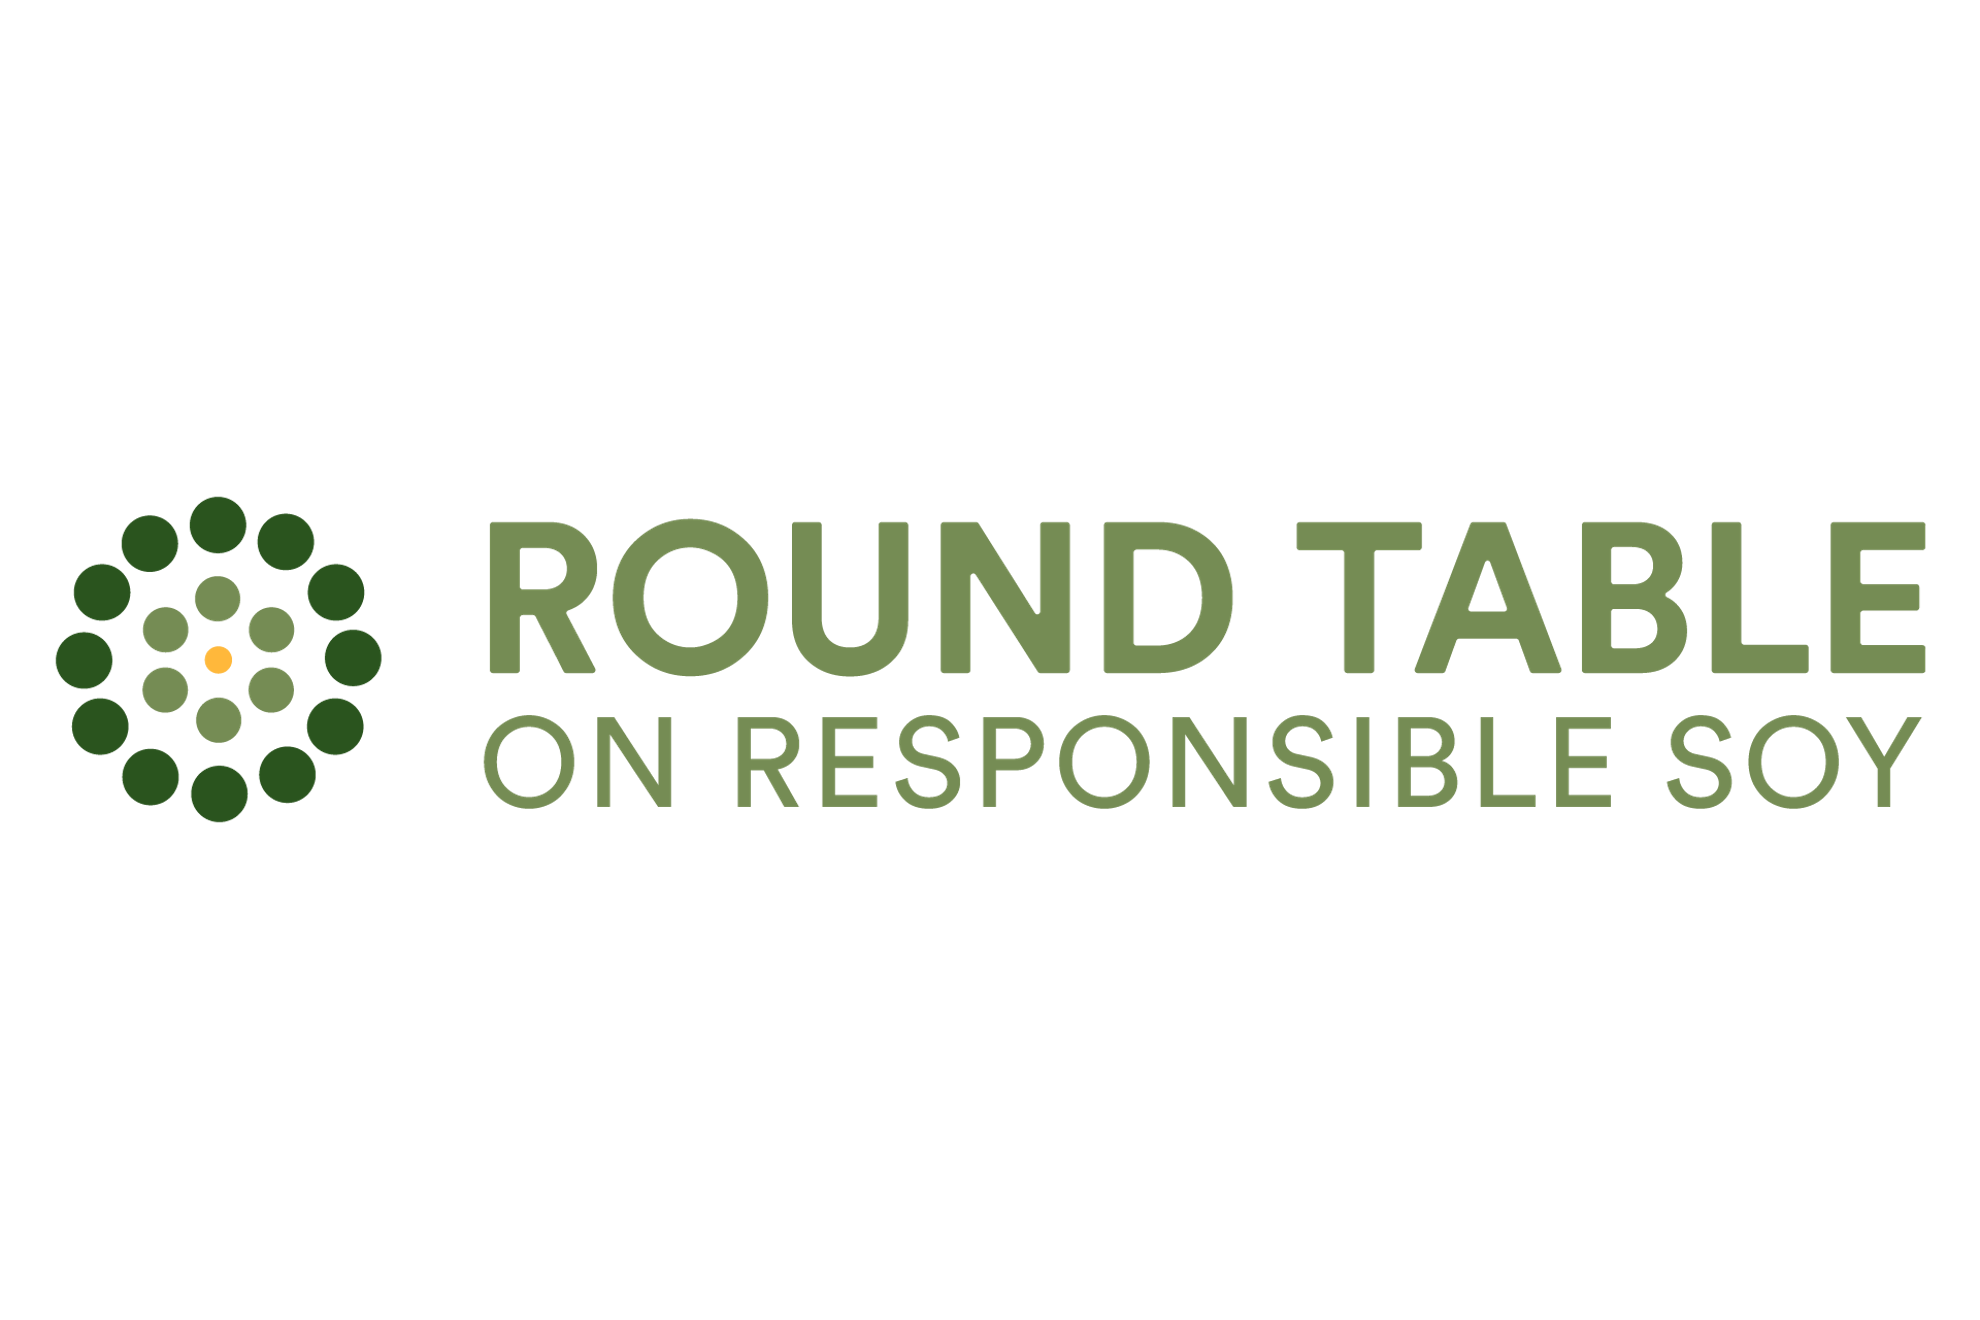 Round Table for Responsible Soy organisation logo